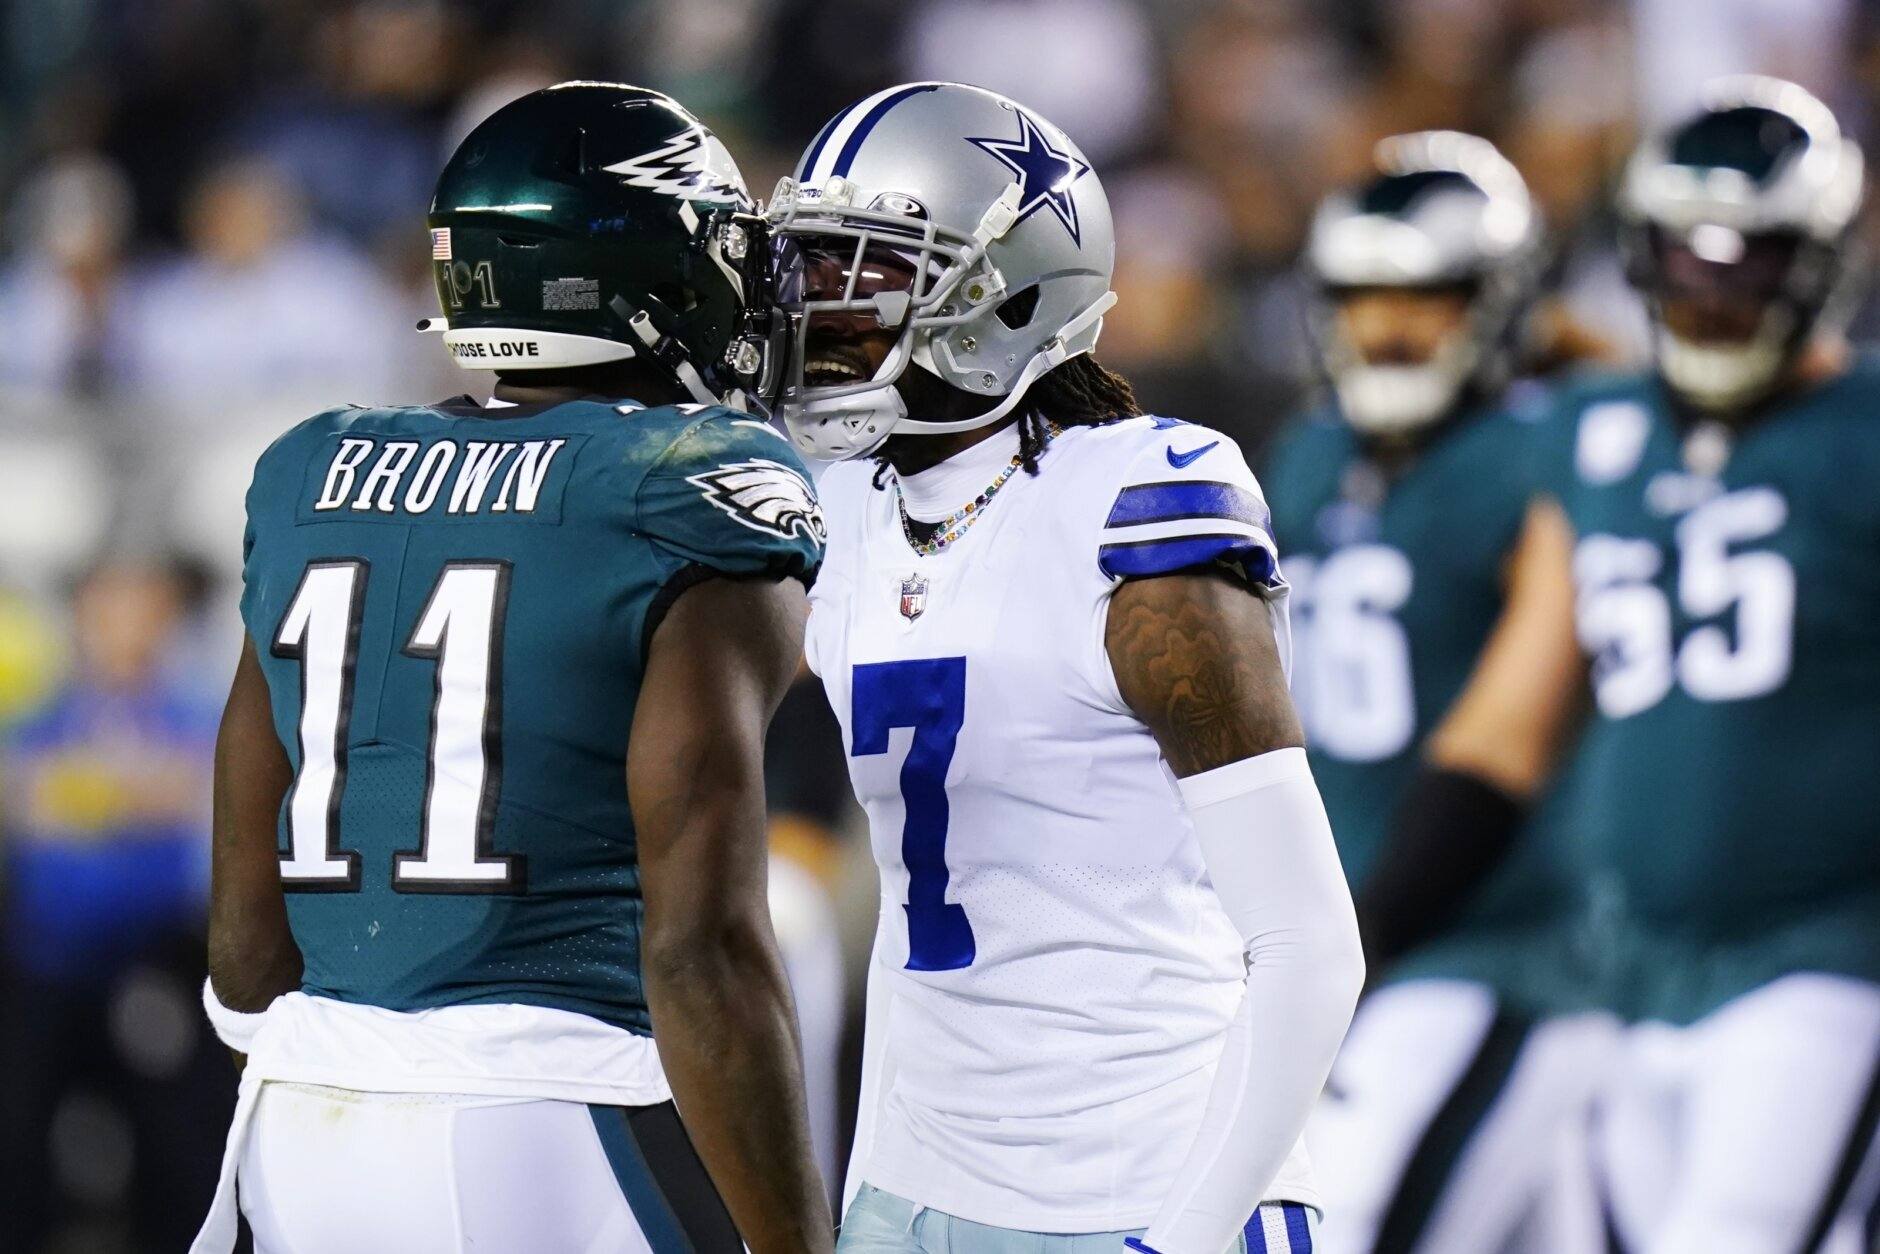 Tickets to Eagles vs. Cowboys Christmas Eve game are still dirt cheap